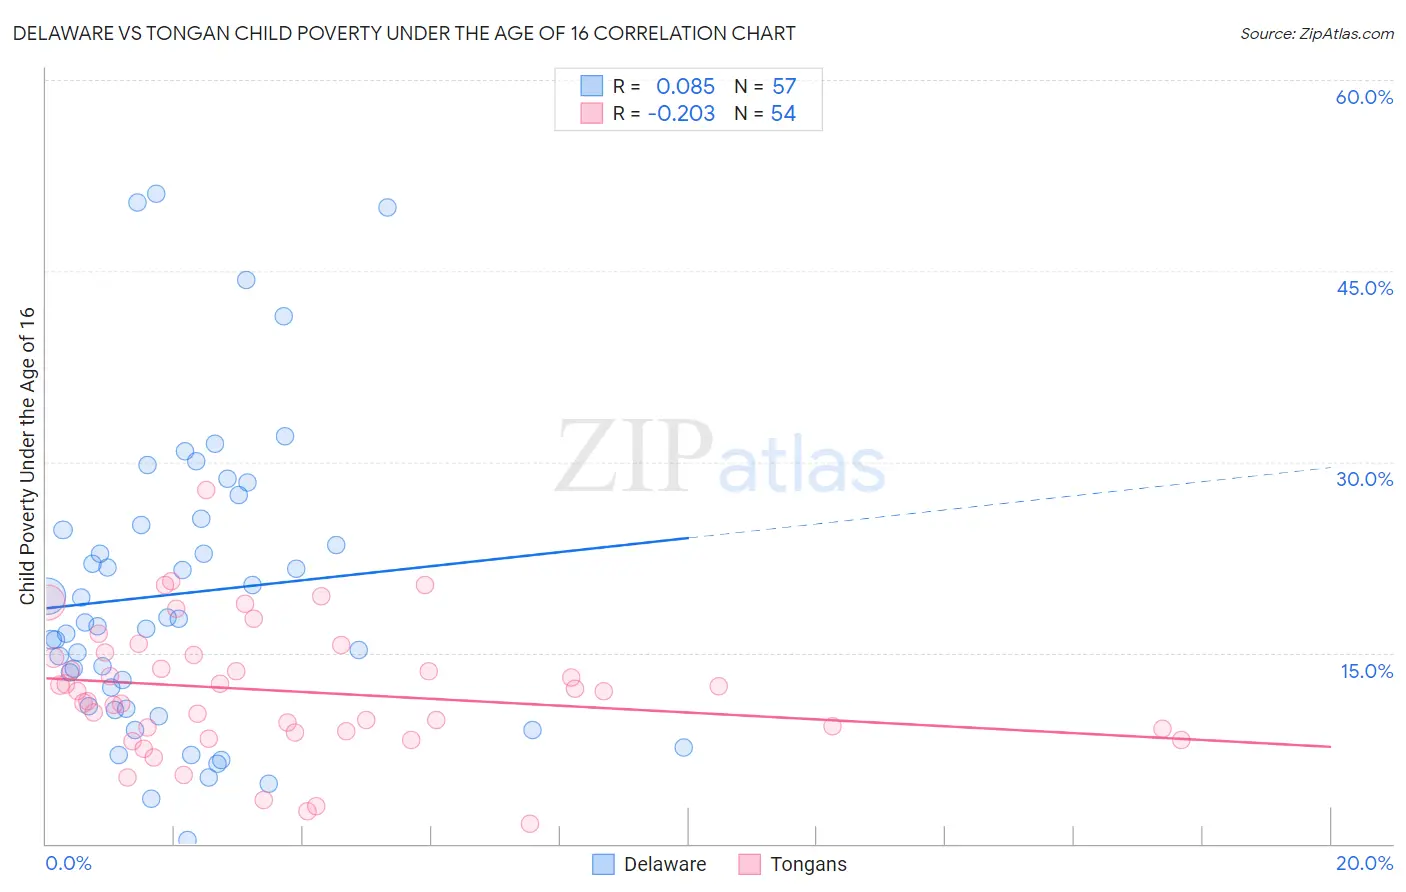 Delaware vs Tongan Child Poverty Under the Age of 16